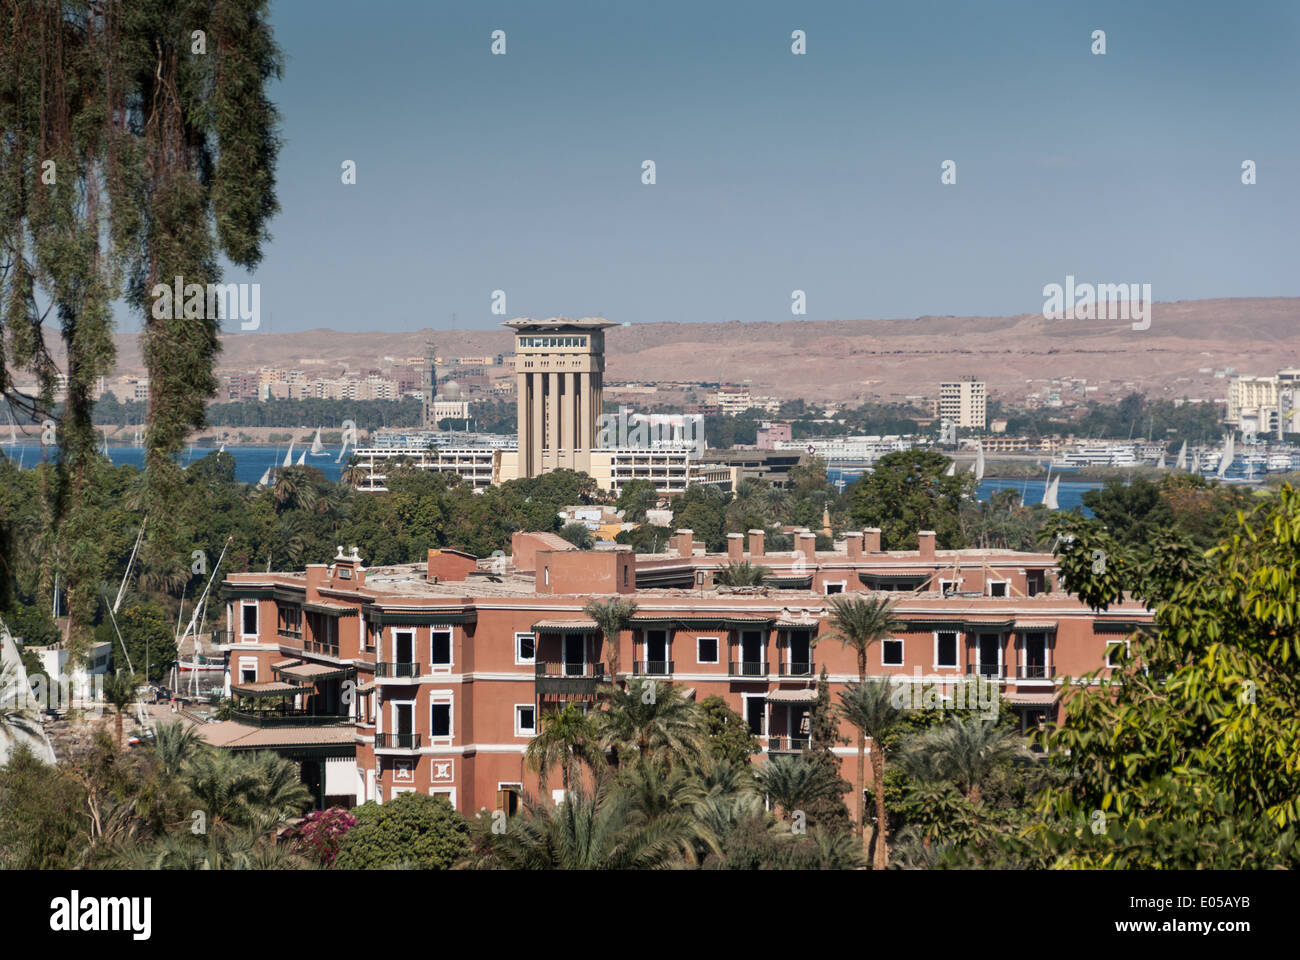 Old Cataract Hotel, Tower of Movenpick Hotel, Nile and Aswan, Upper Egypt Stock Photo